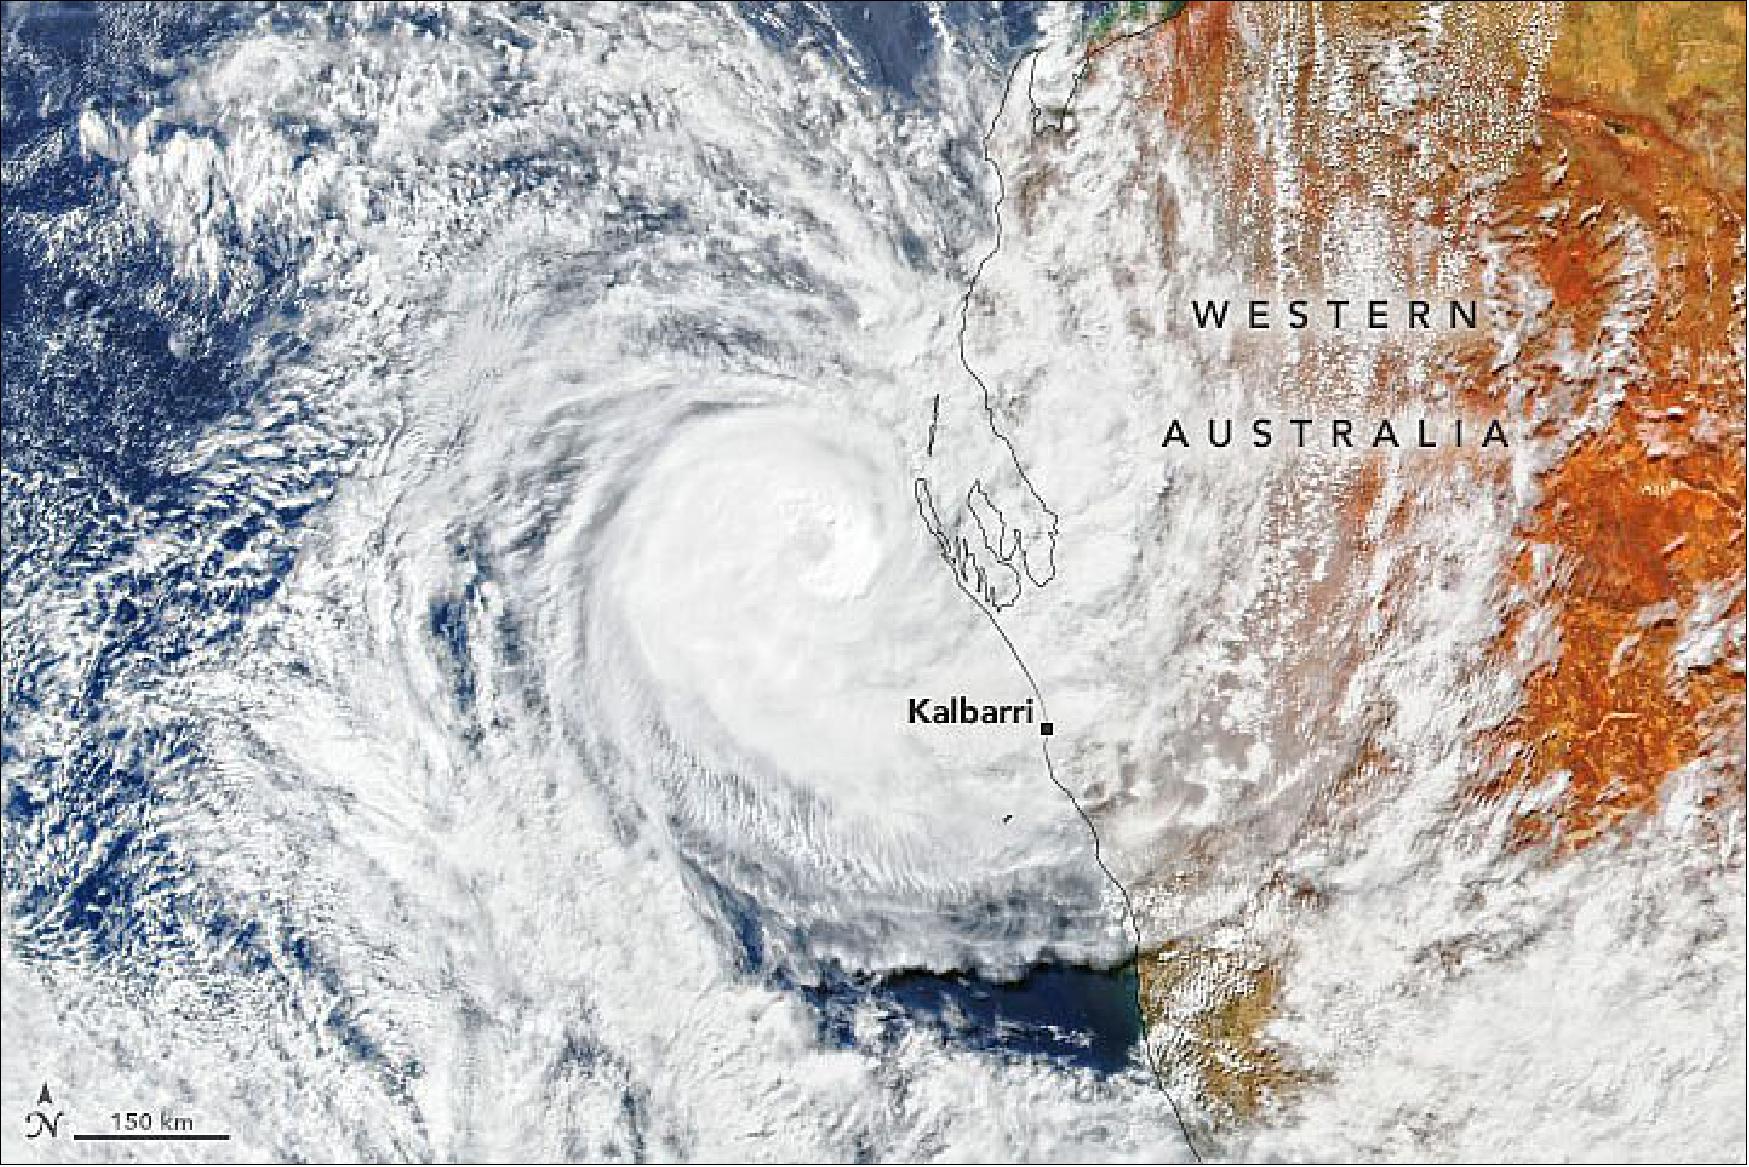 Figure 49: The category three cyclone made a rare landfall in Western Australia, causing significant damage to coastal towns. The VIIRS instrument on the Suomi NPP satellite captured this image on April 11, hours before the storm made landfall (image credit: NASA Earth Observatory image by Joshua Stevens, using VIIRS data from NASA EOSDIS LANCE, GIBS/Worldview, and the Suomi National Polar-orbiting Partnership. Story by Kasha Patel)